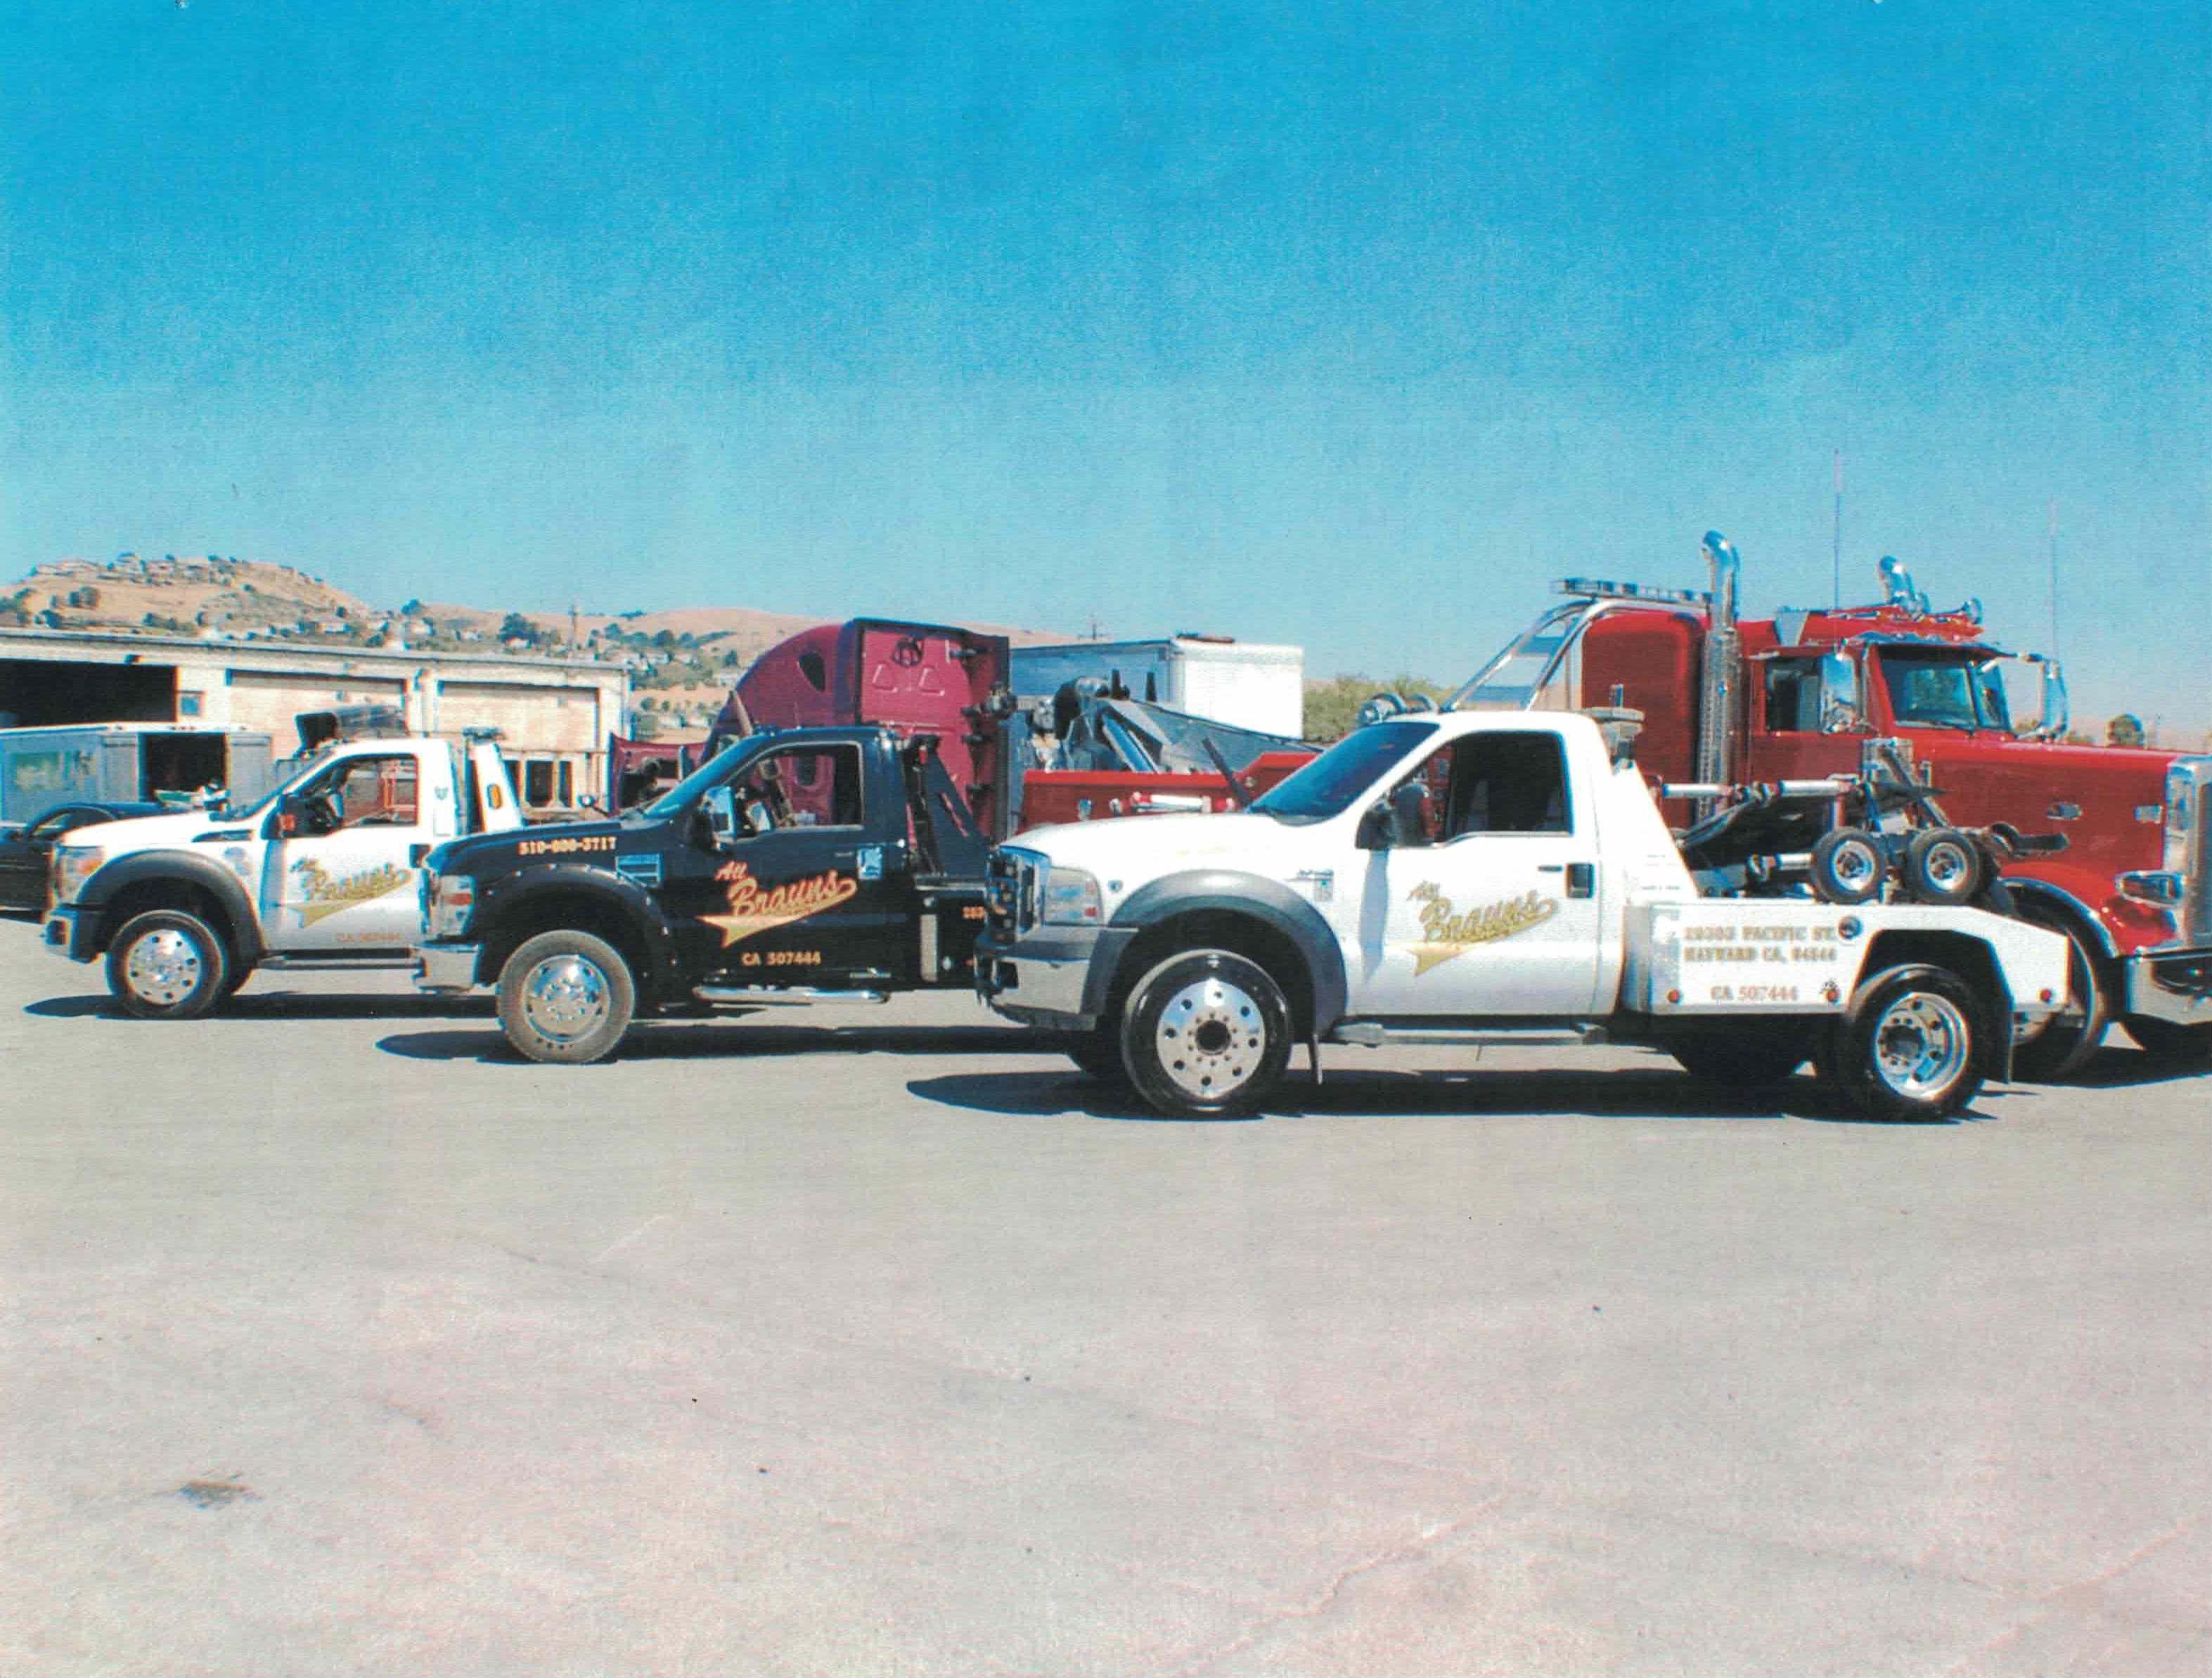 All Brauns Towing Inc. | (510) 606-3717 | Hayward CA | 24 Hour Towing Service | Light Duty Towing |  All Brauns Towing Inc. Hayward (510)606-3717